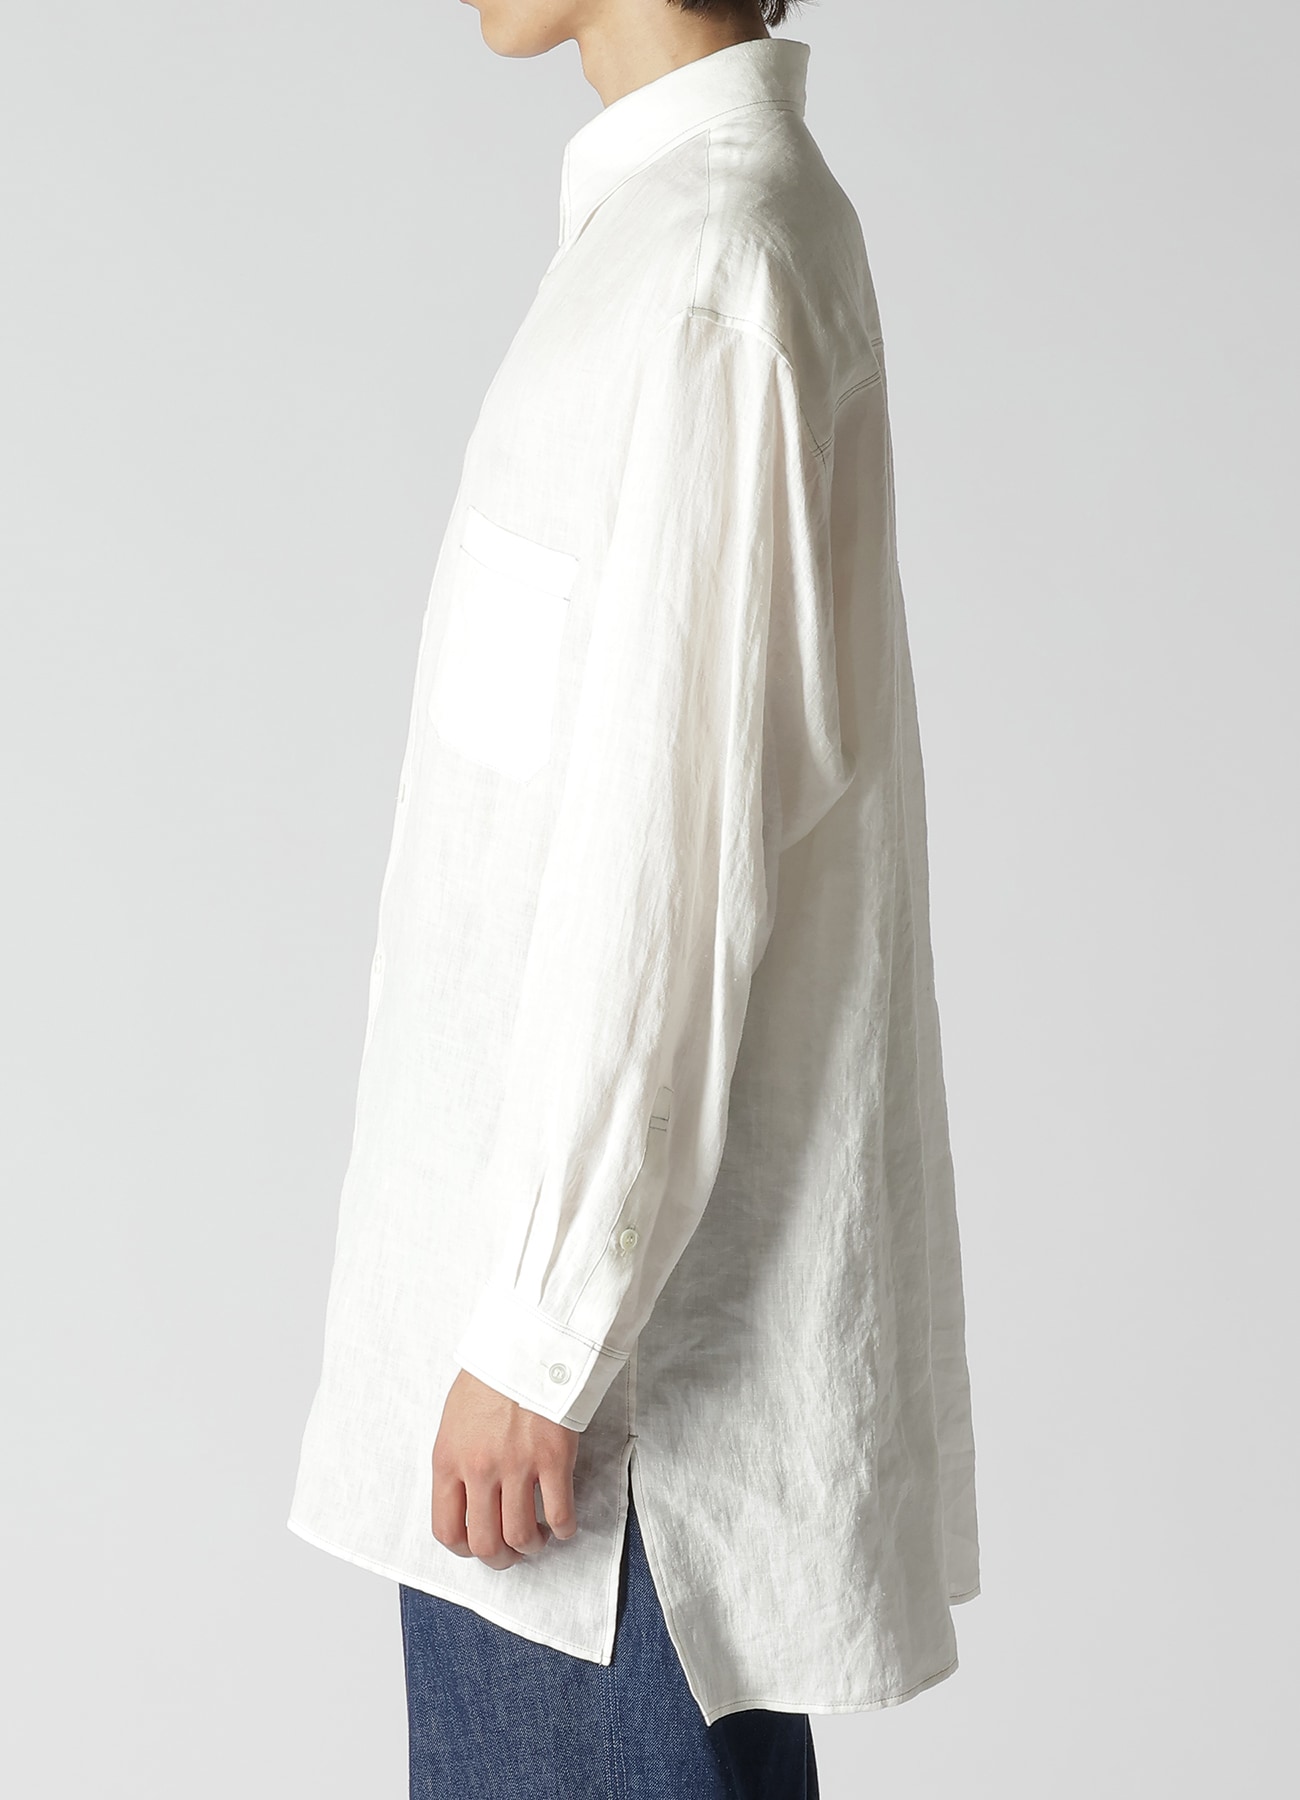 WHITE 60 LINEN LAWN SHIRT WITH ASYMMETRY COLLAR AND COLLOR COMBI 